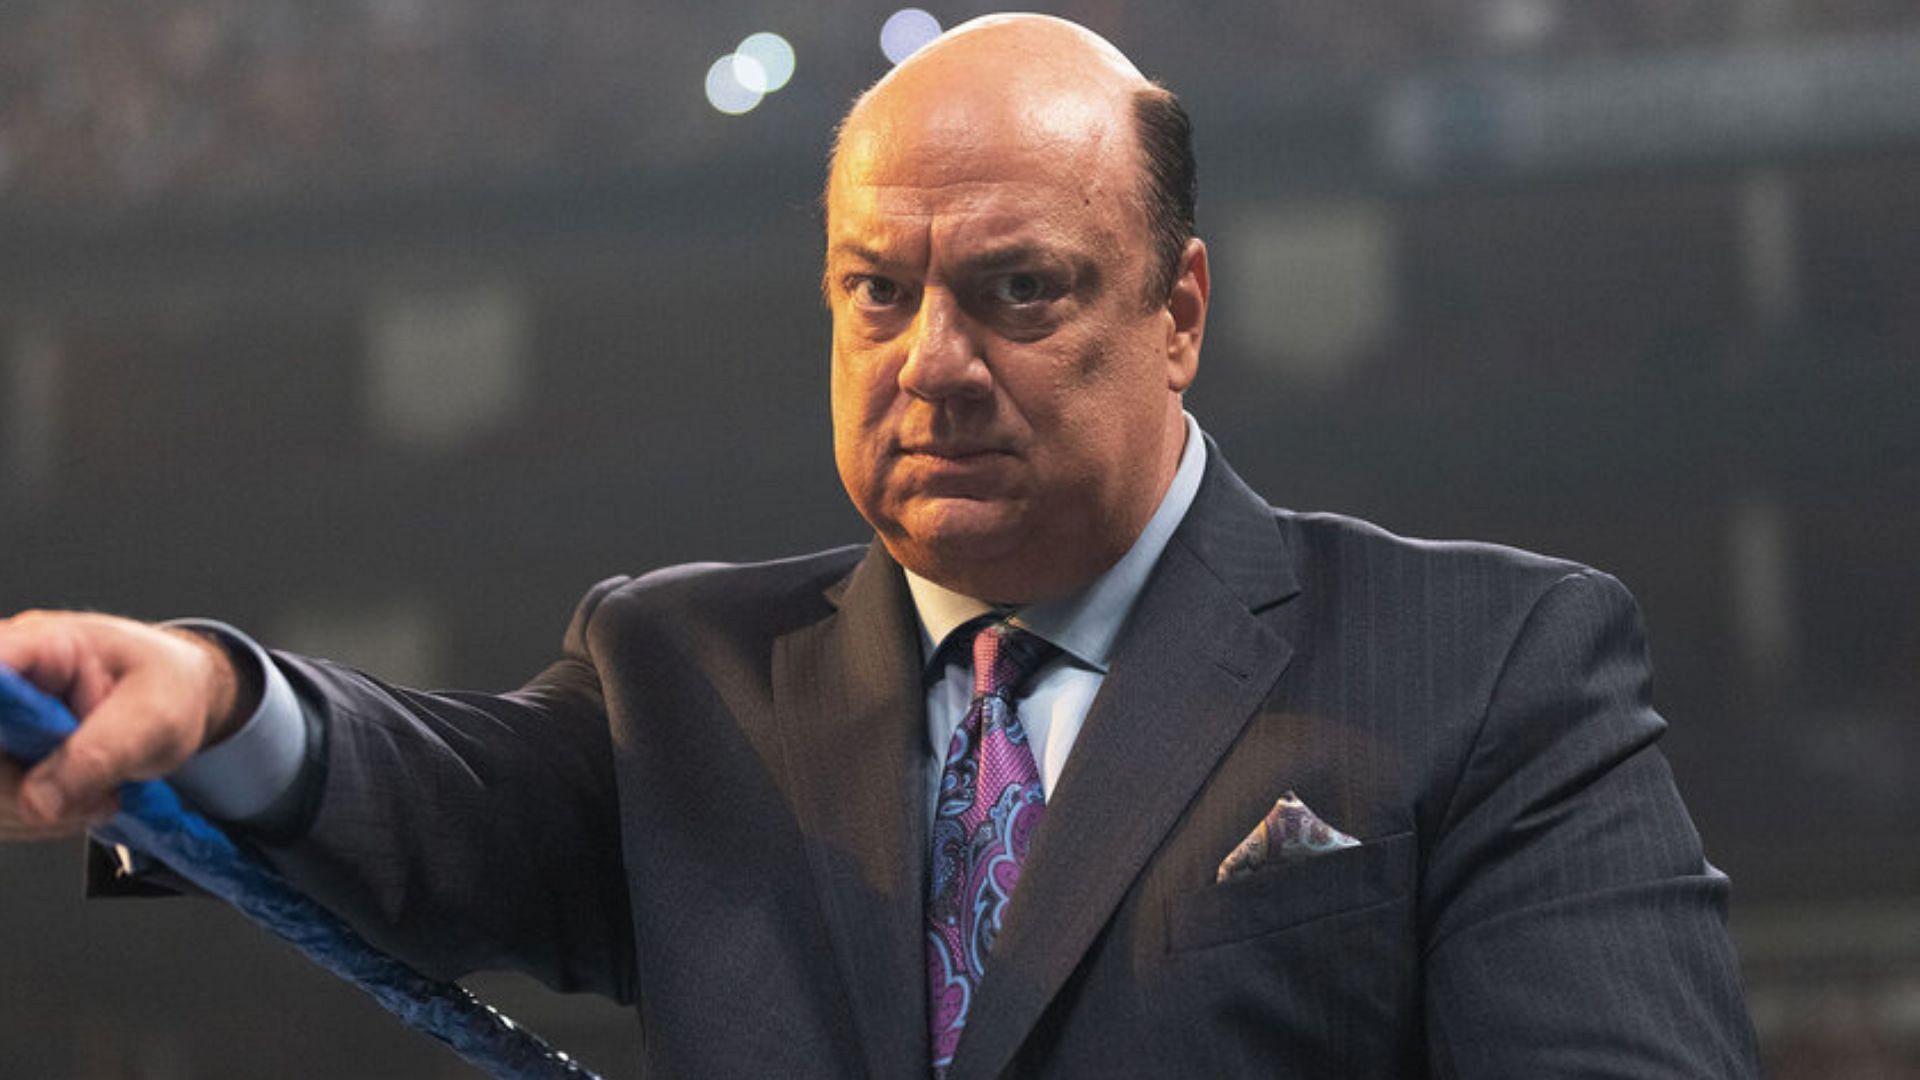 Heyman is The Wiseman of The Bloodline on SmackDown.